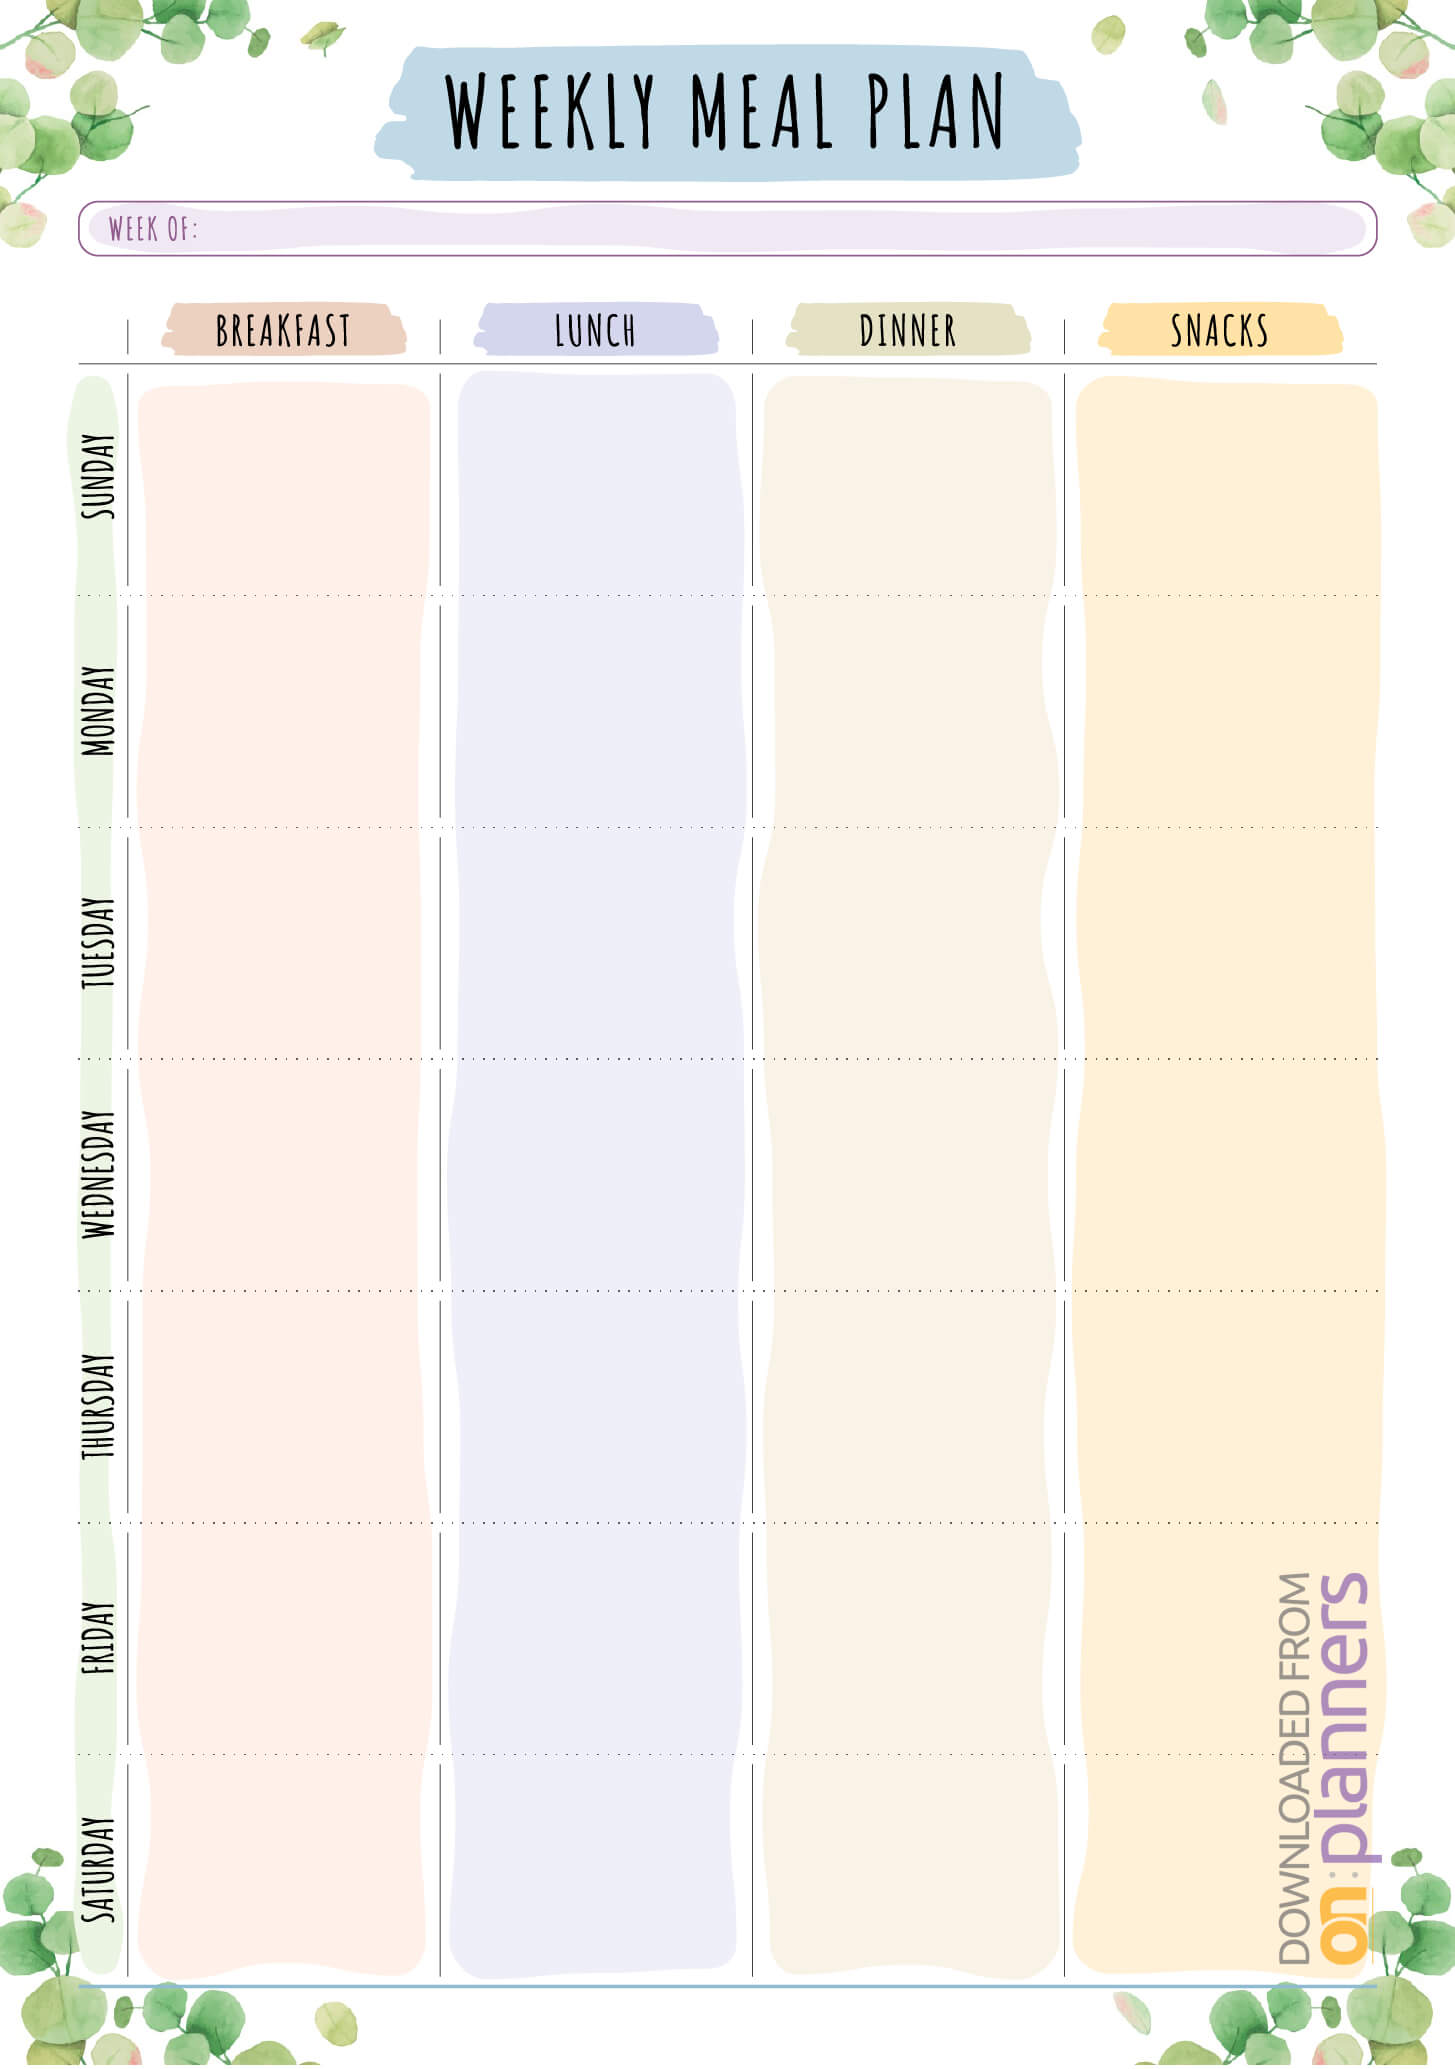 Download Printable Weekly Meal Plan – Floral Style Pdf With Blank Meal Plan Template